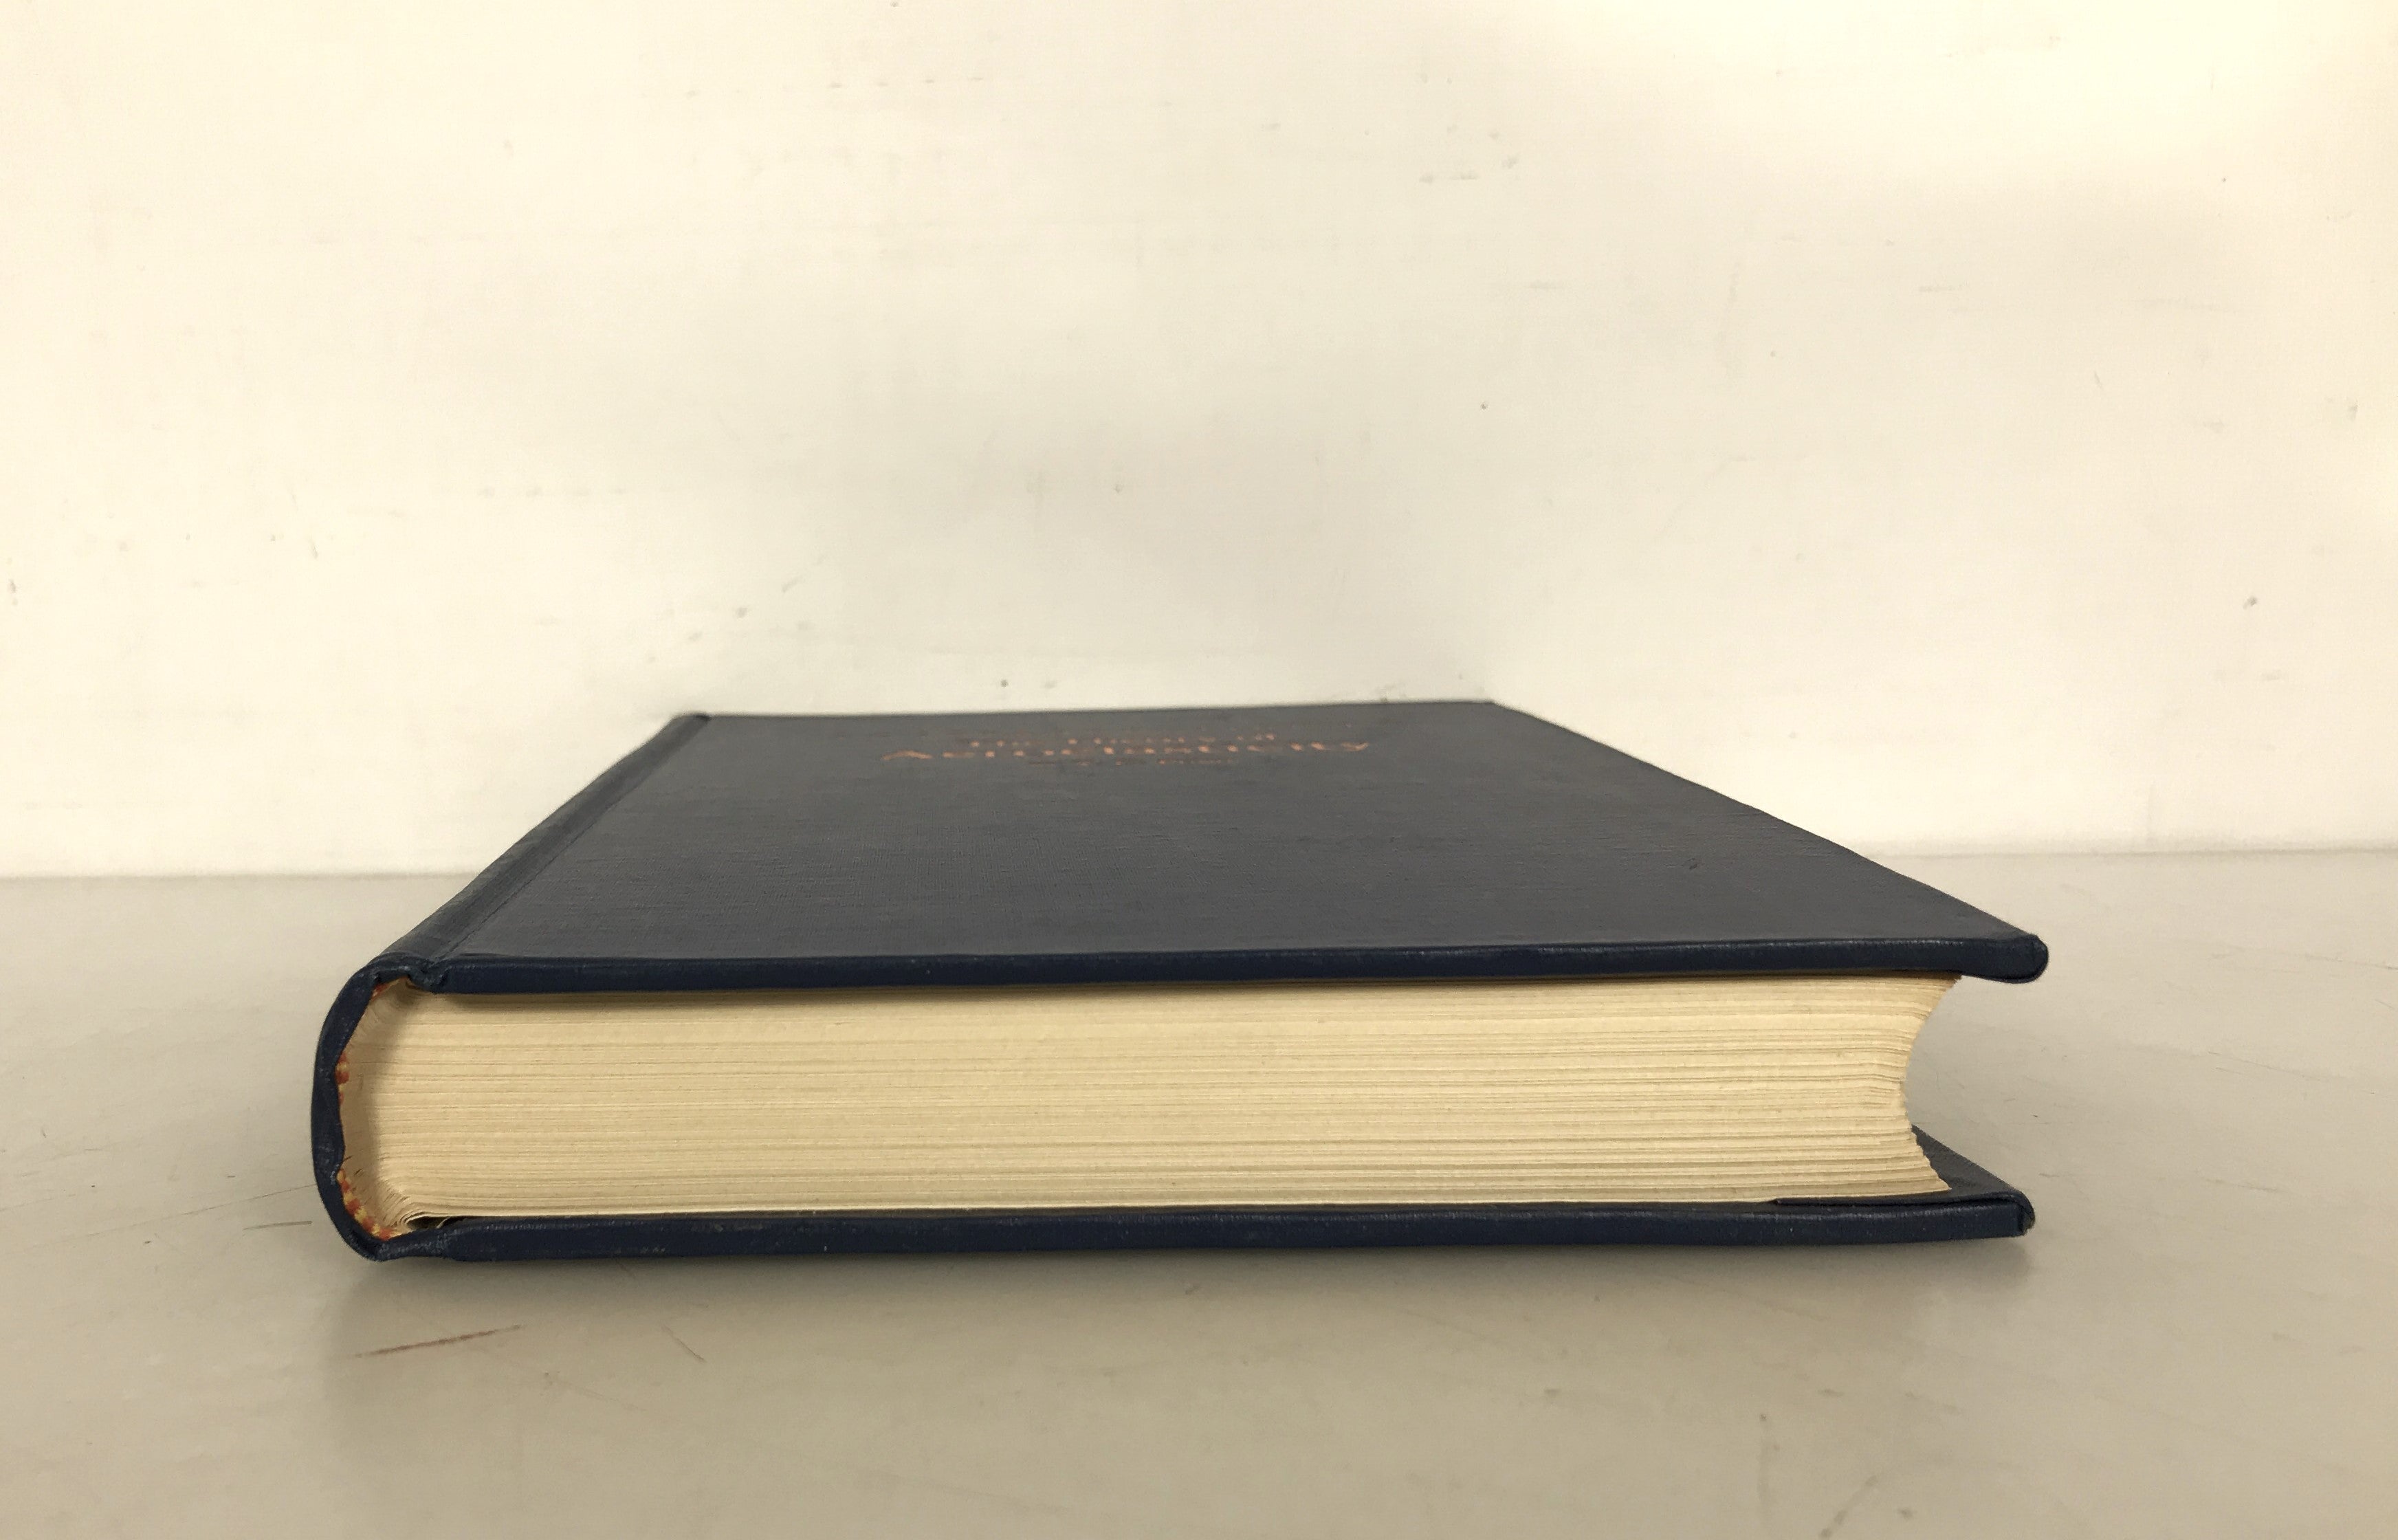 An Introduction to the Theory of Aeroelasticity by Y.C. Fung 1969 HC